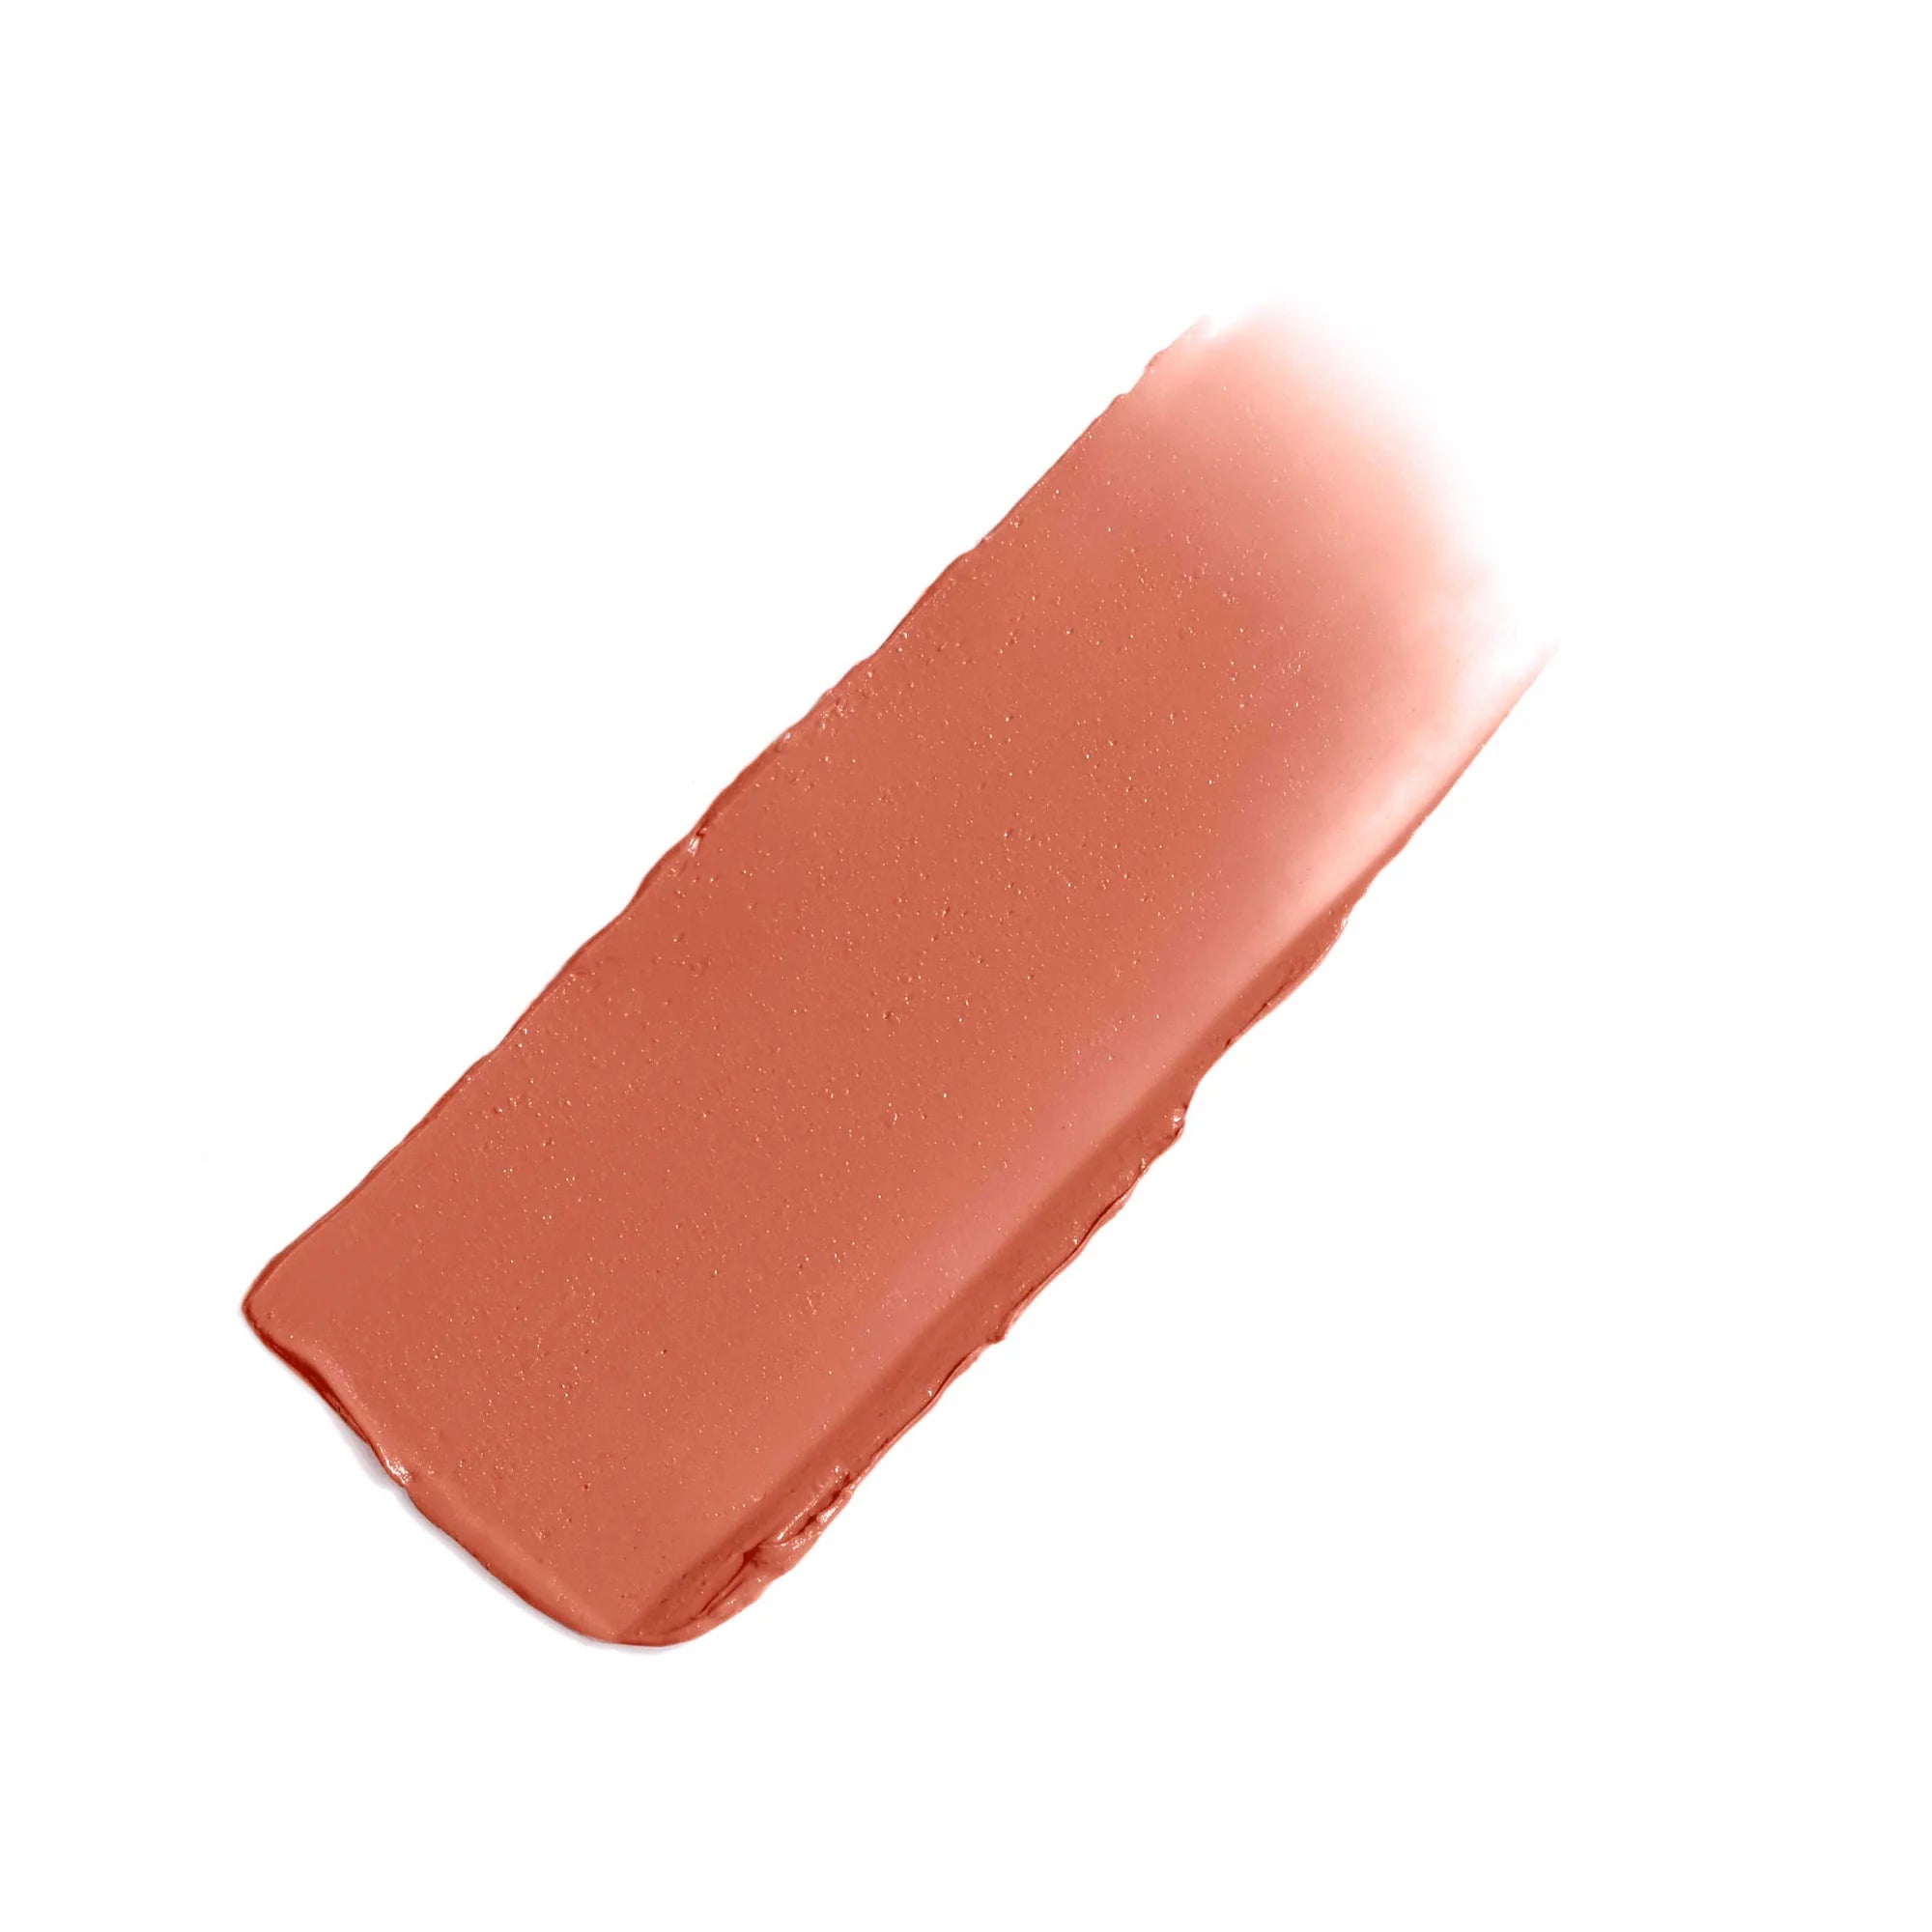 Jane Iredale's Glow Time Blush Stick - shade Smolder - warm nude rose with no-shimmer